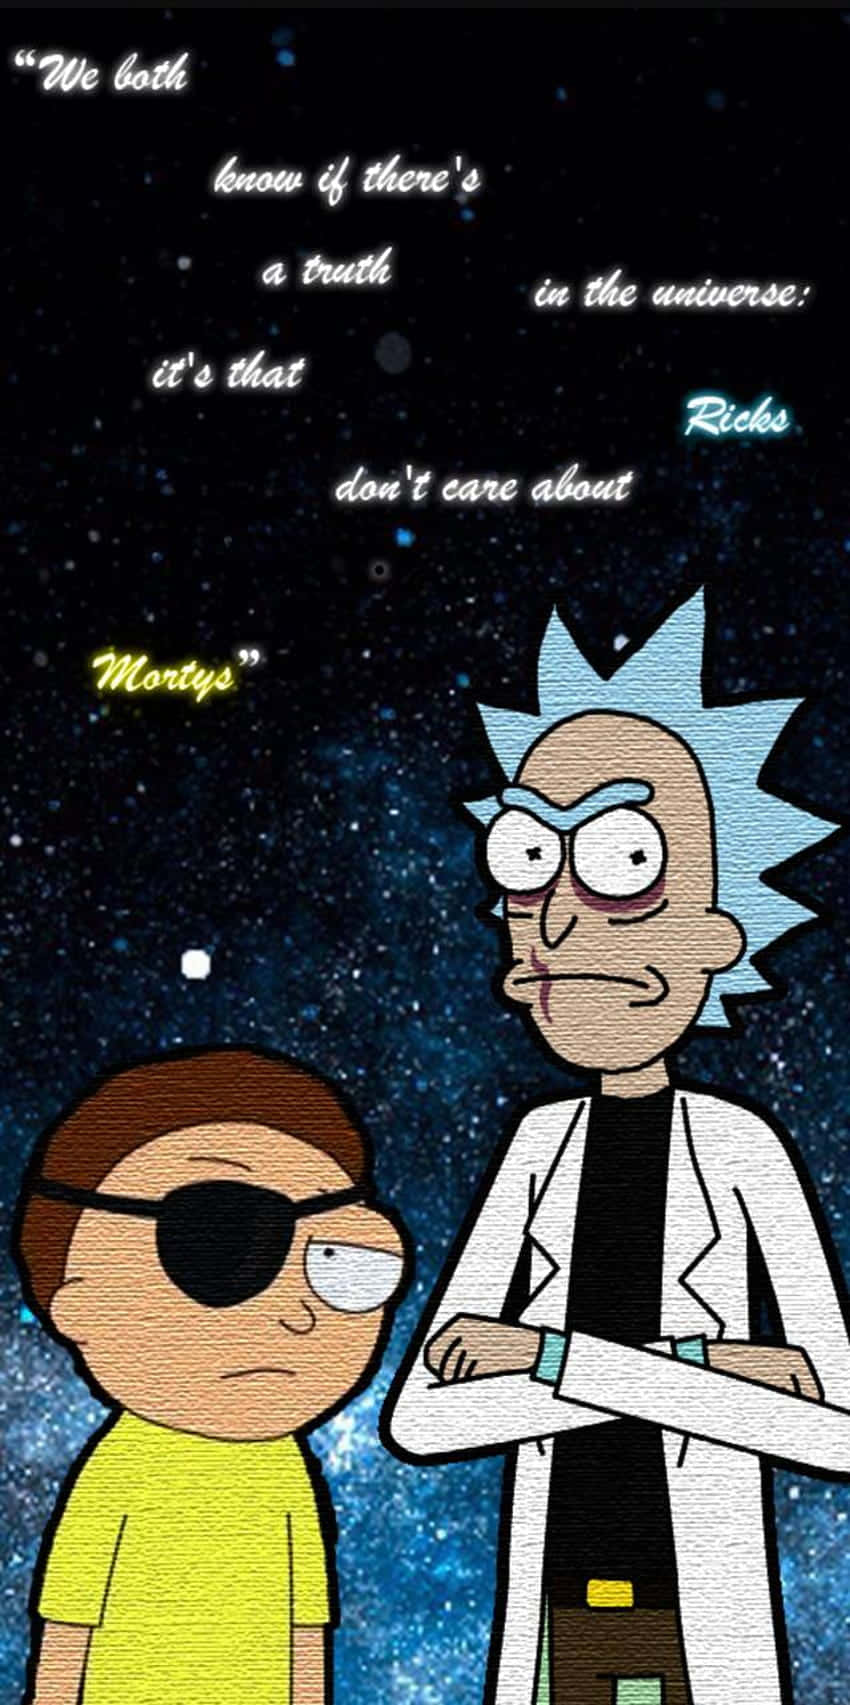 Cunning Evil Morty preparing for another masterplan. Wallpaper